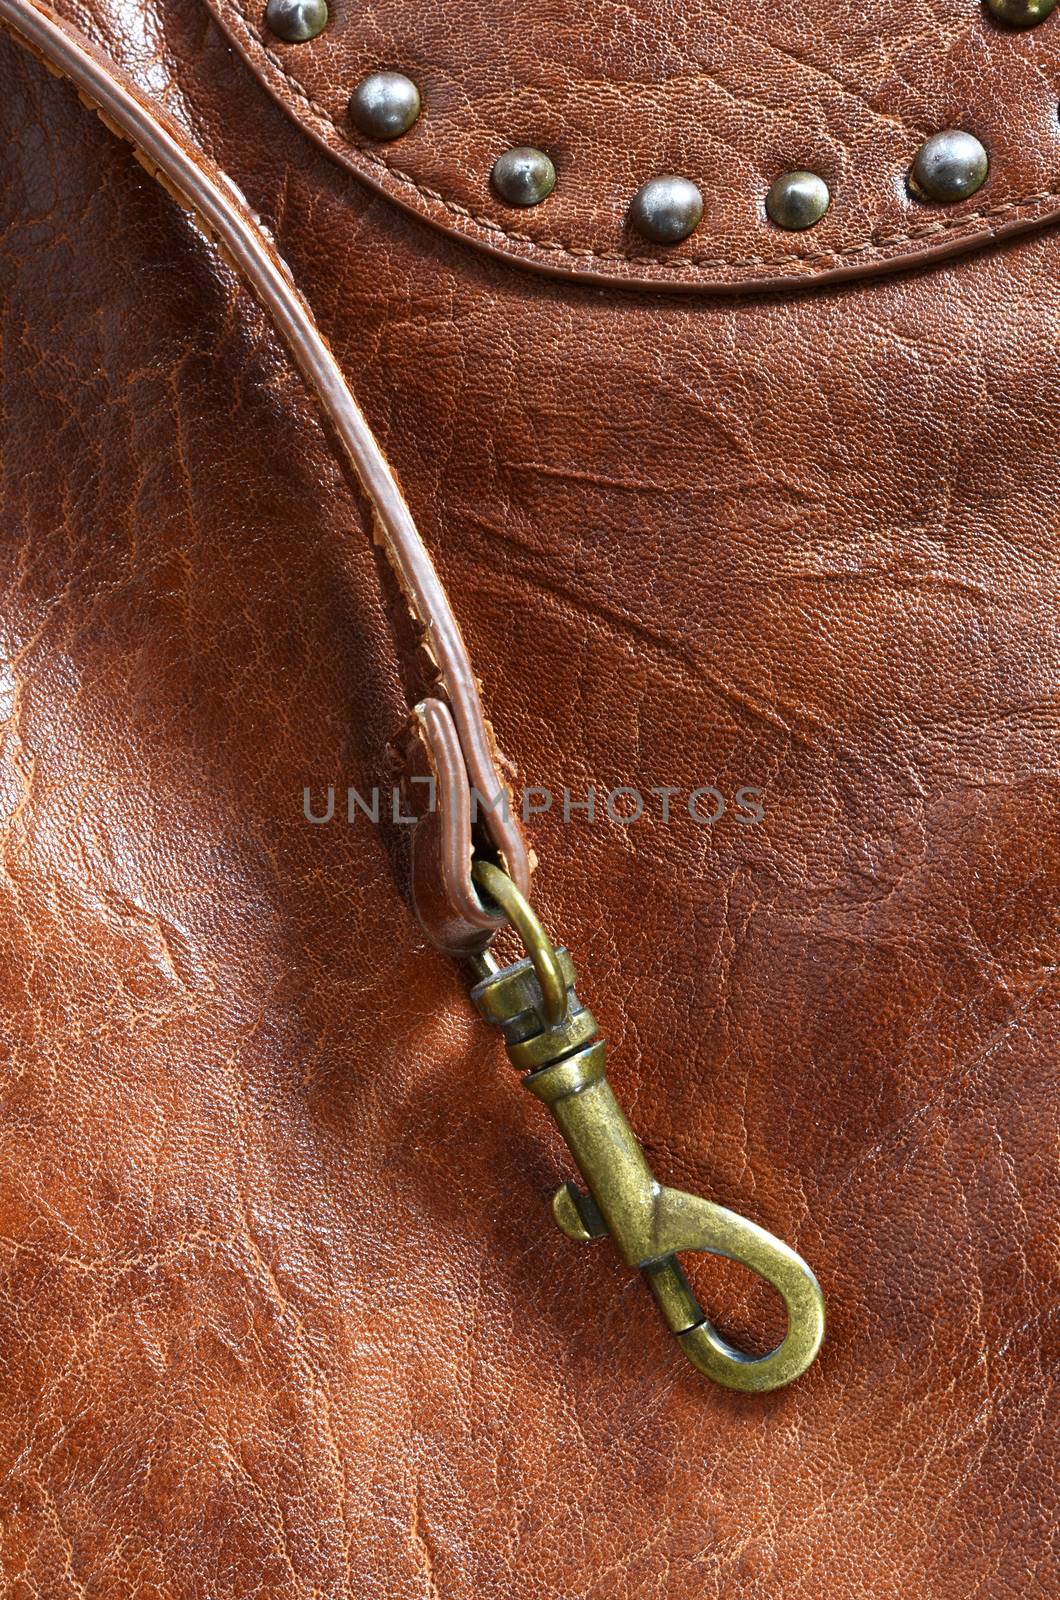 leather bag detail by sarkao